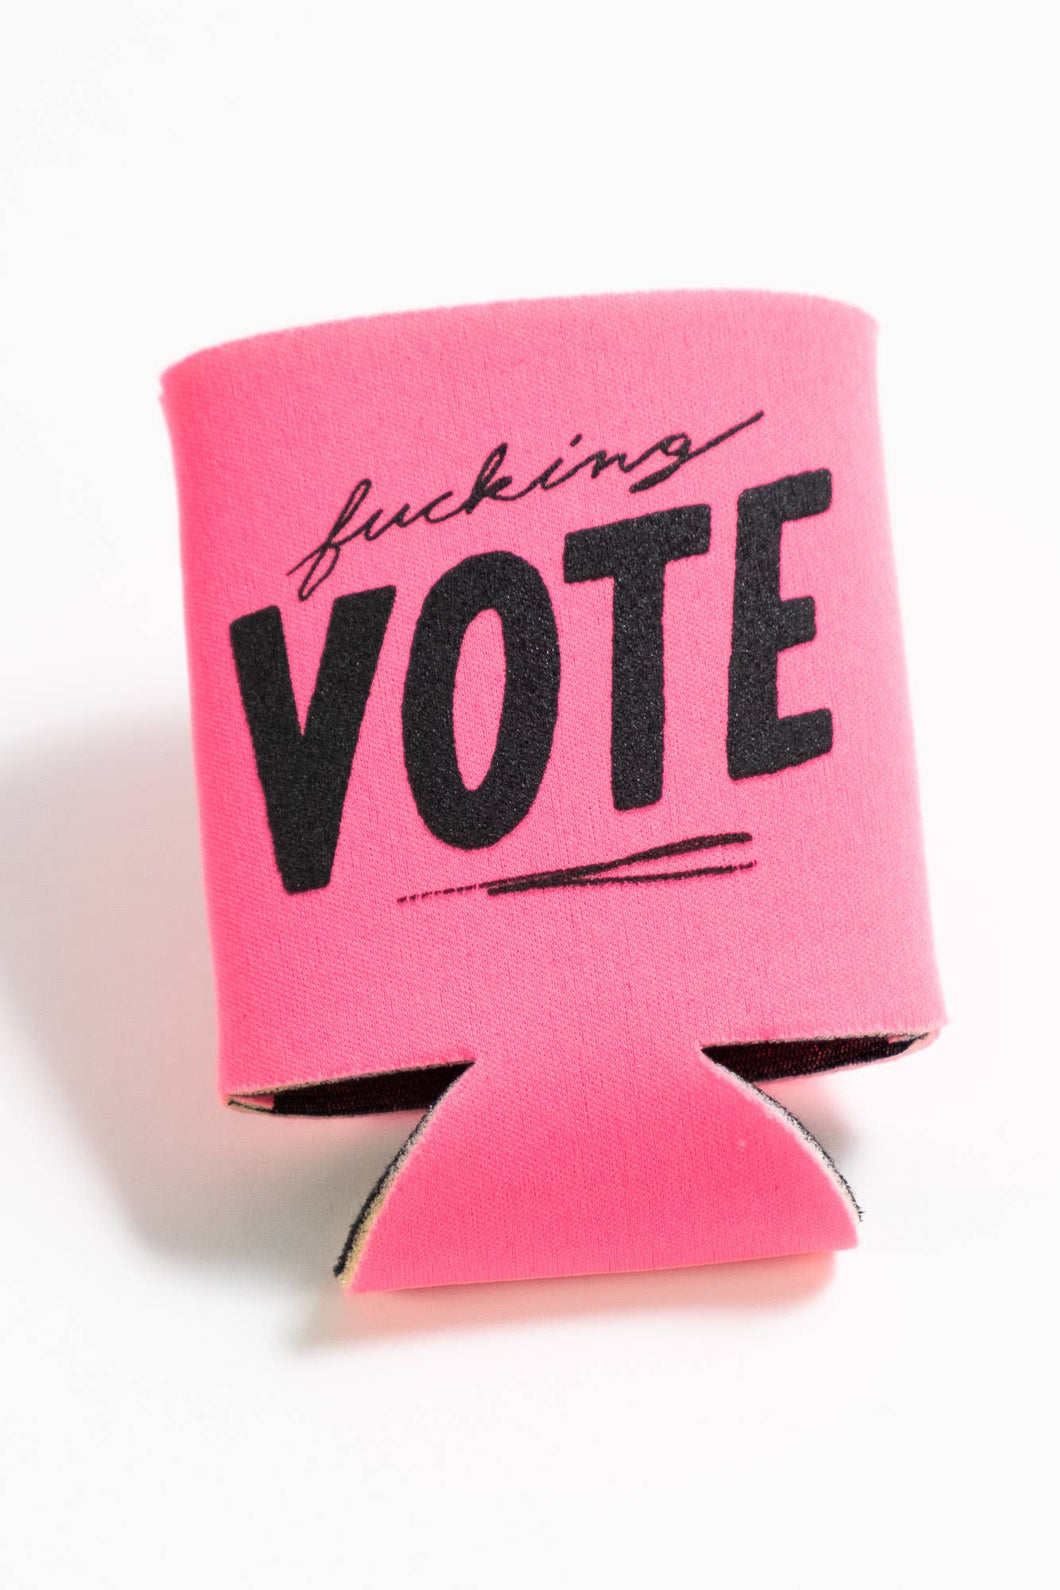 F-ing Vote coozie